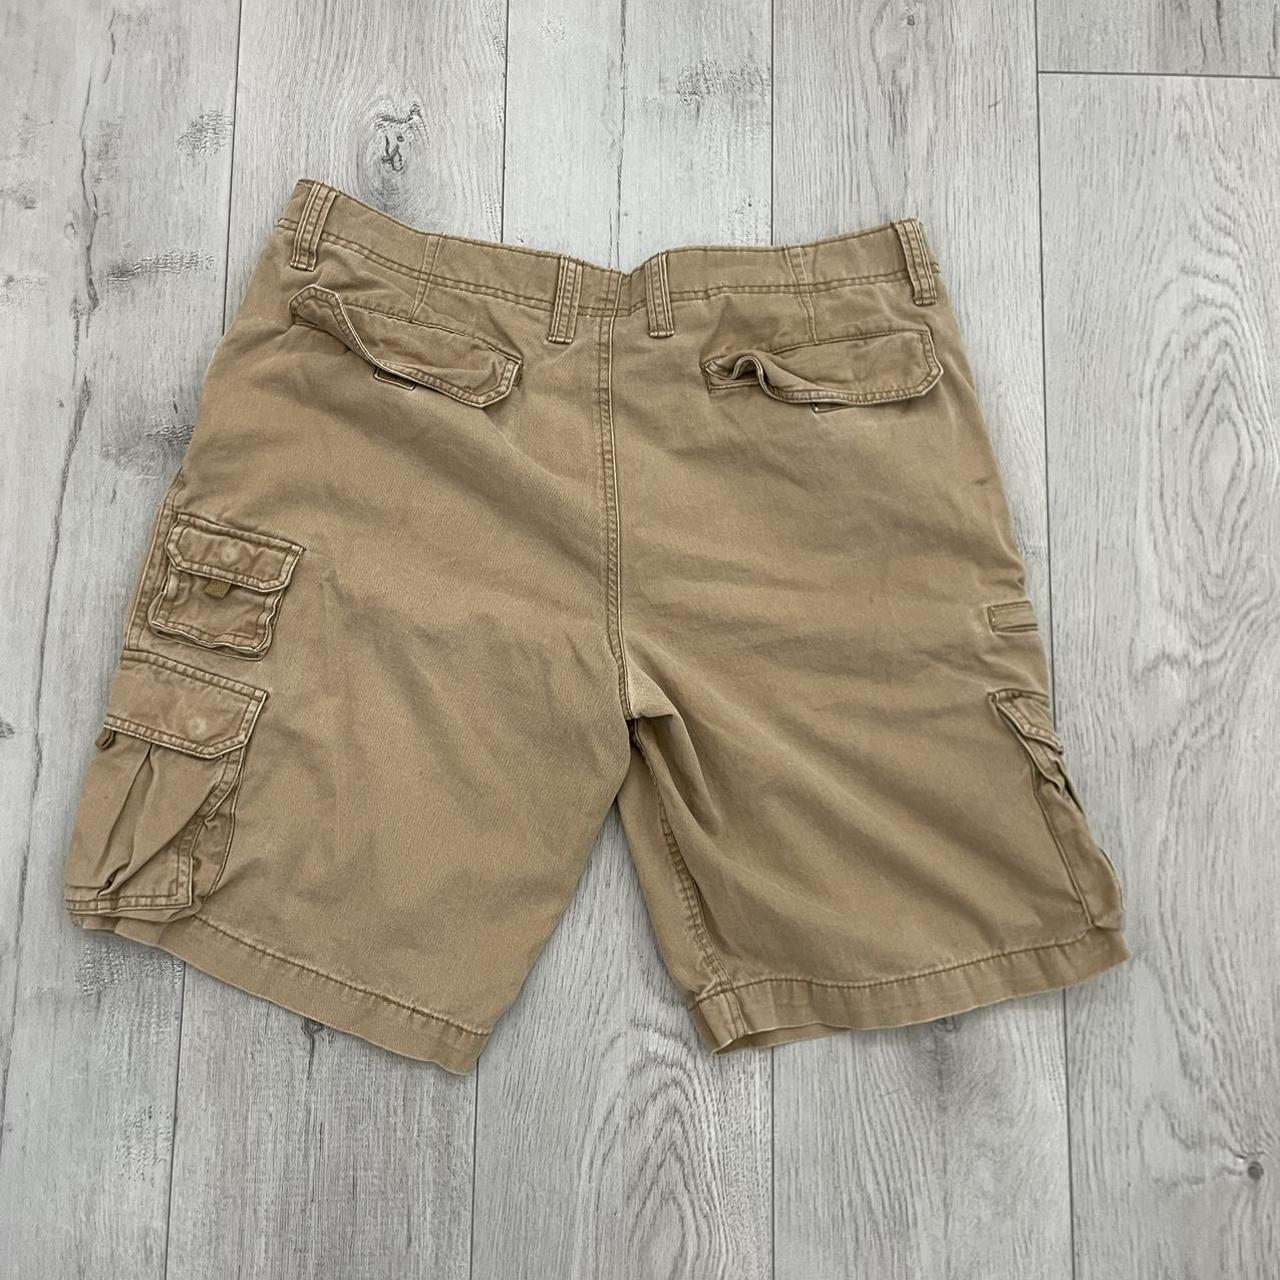 Vintage Faded Glory cargo shorts⁉️ nice pair of... - Depop